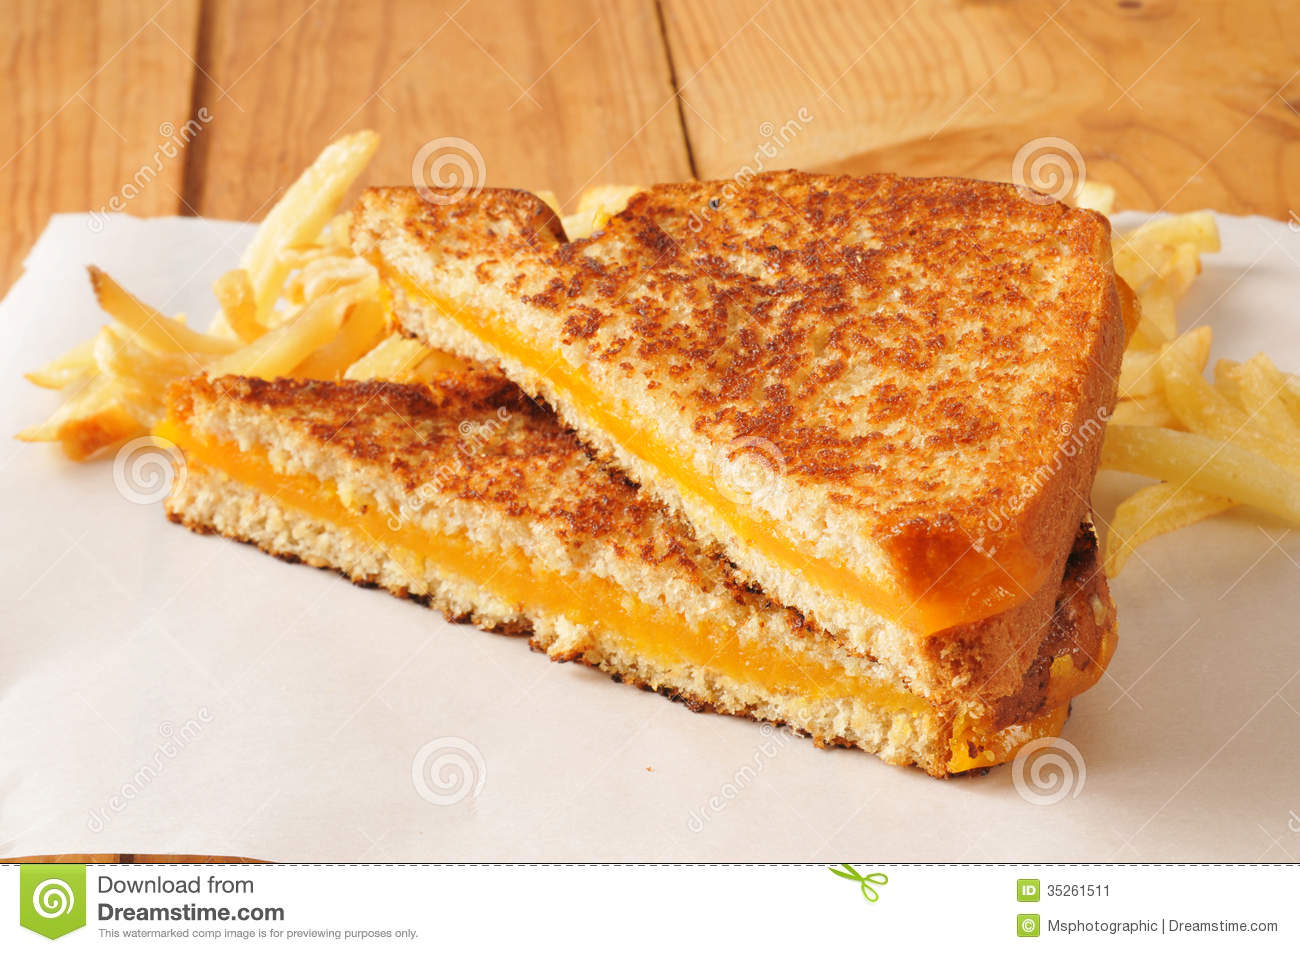 Grilled Cheese Sandwich With Fries Stock Image   Image  35261511